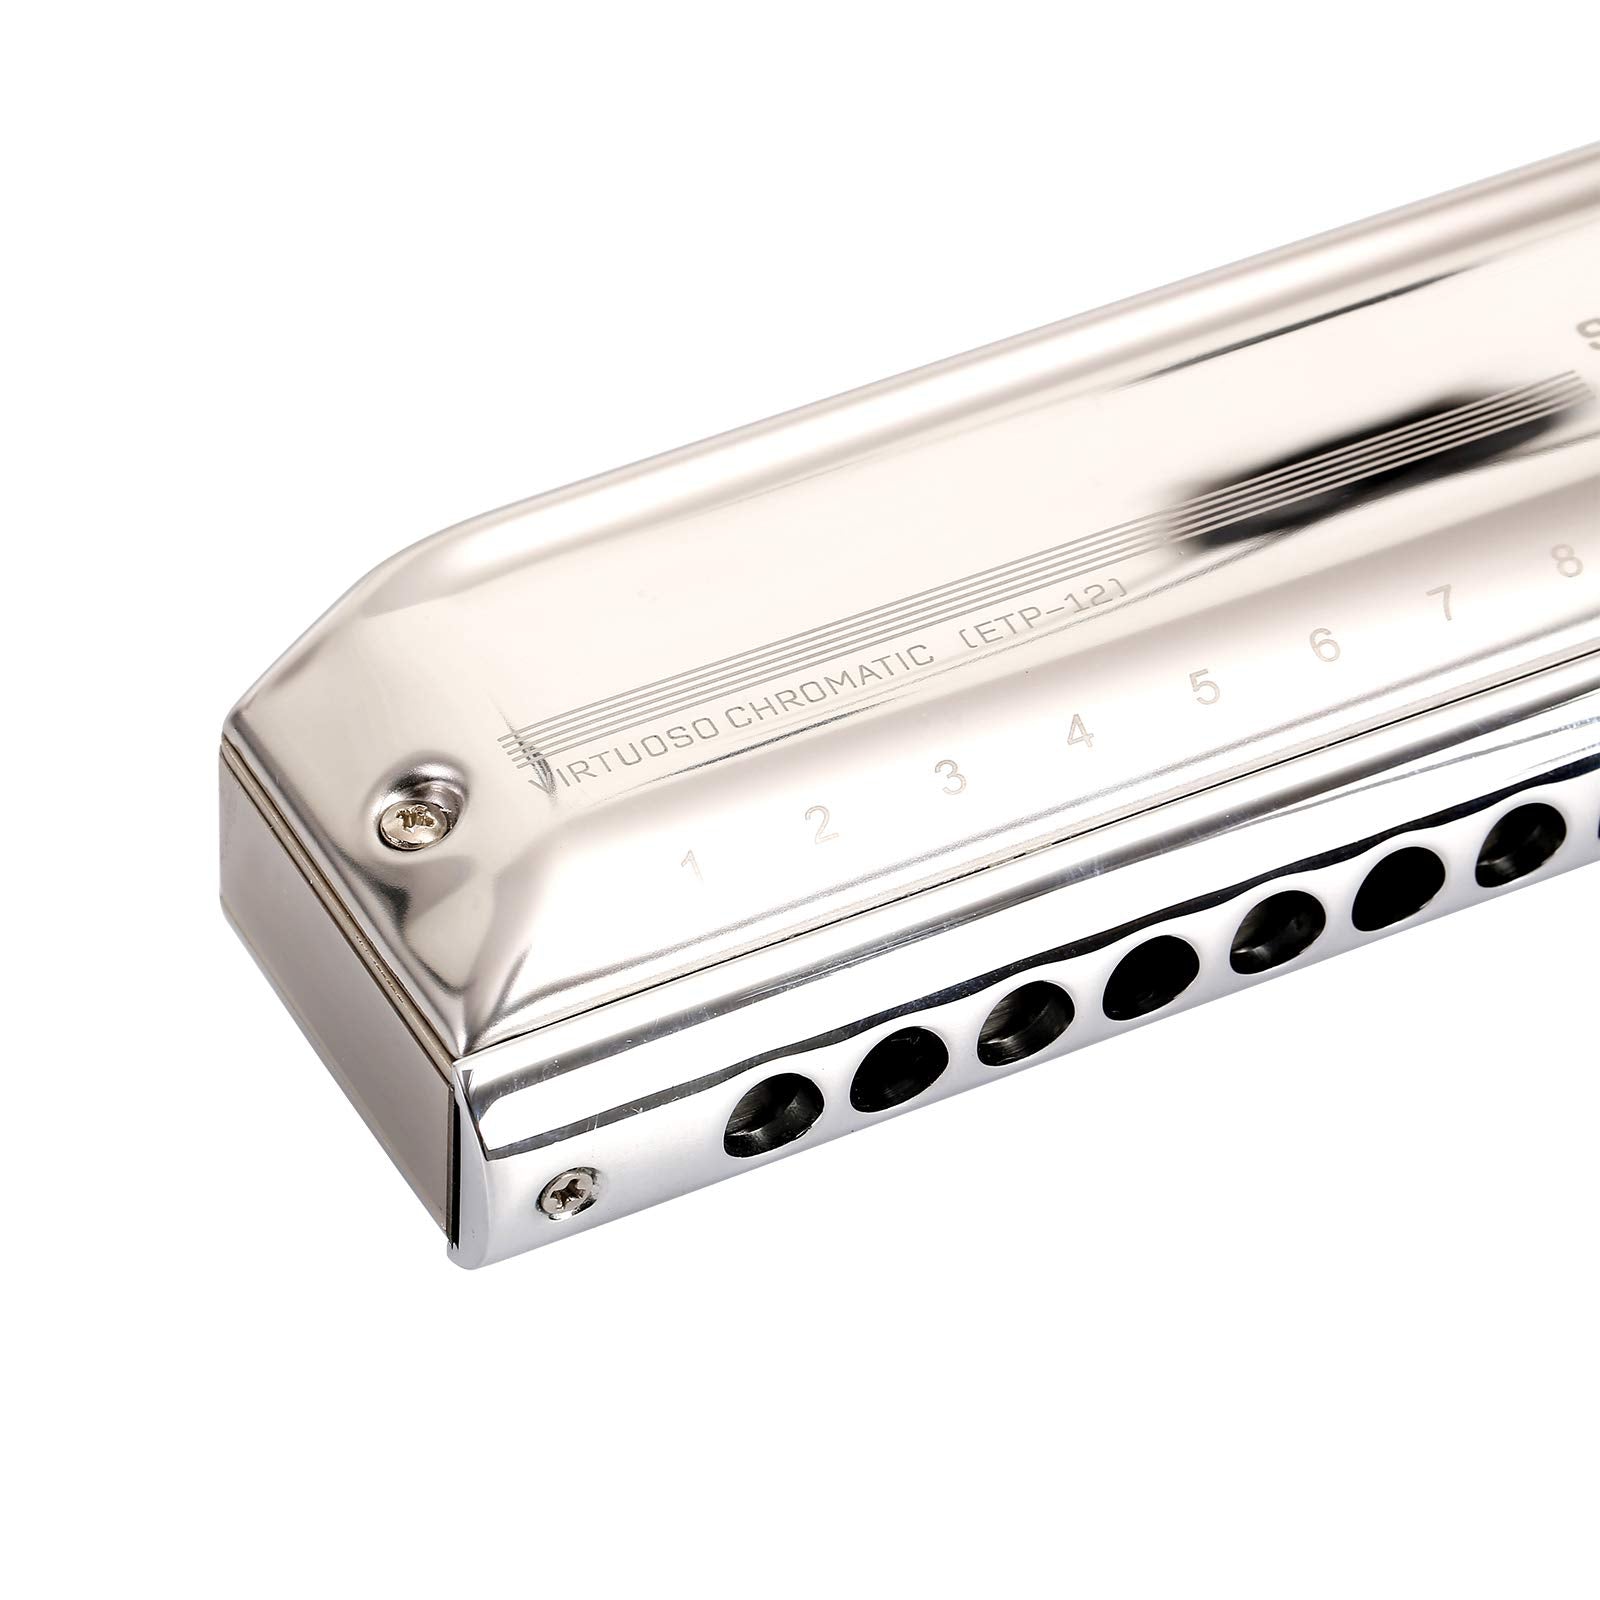 East top Upgrade Chromatic Harmonica 12 Hole 48 Tone Key of C, Professional Chromatic Mouth Organ Harmonica For Adults, Students and band players - Easttop harmonica